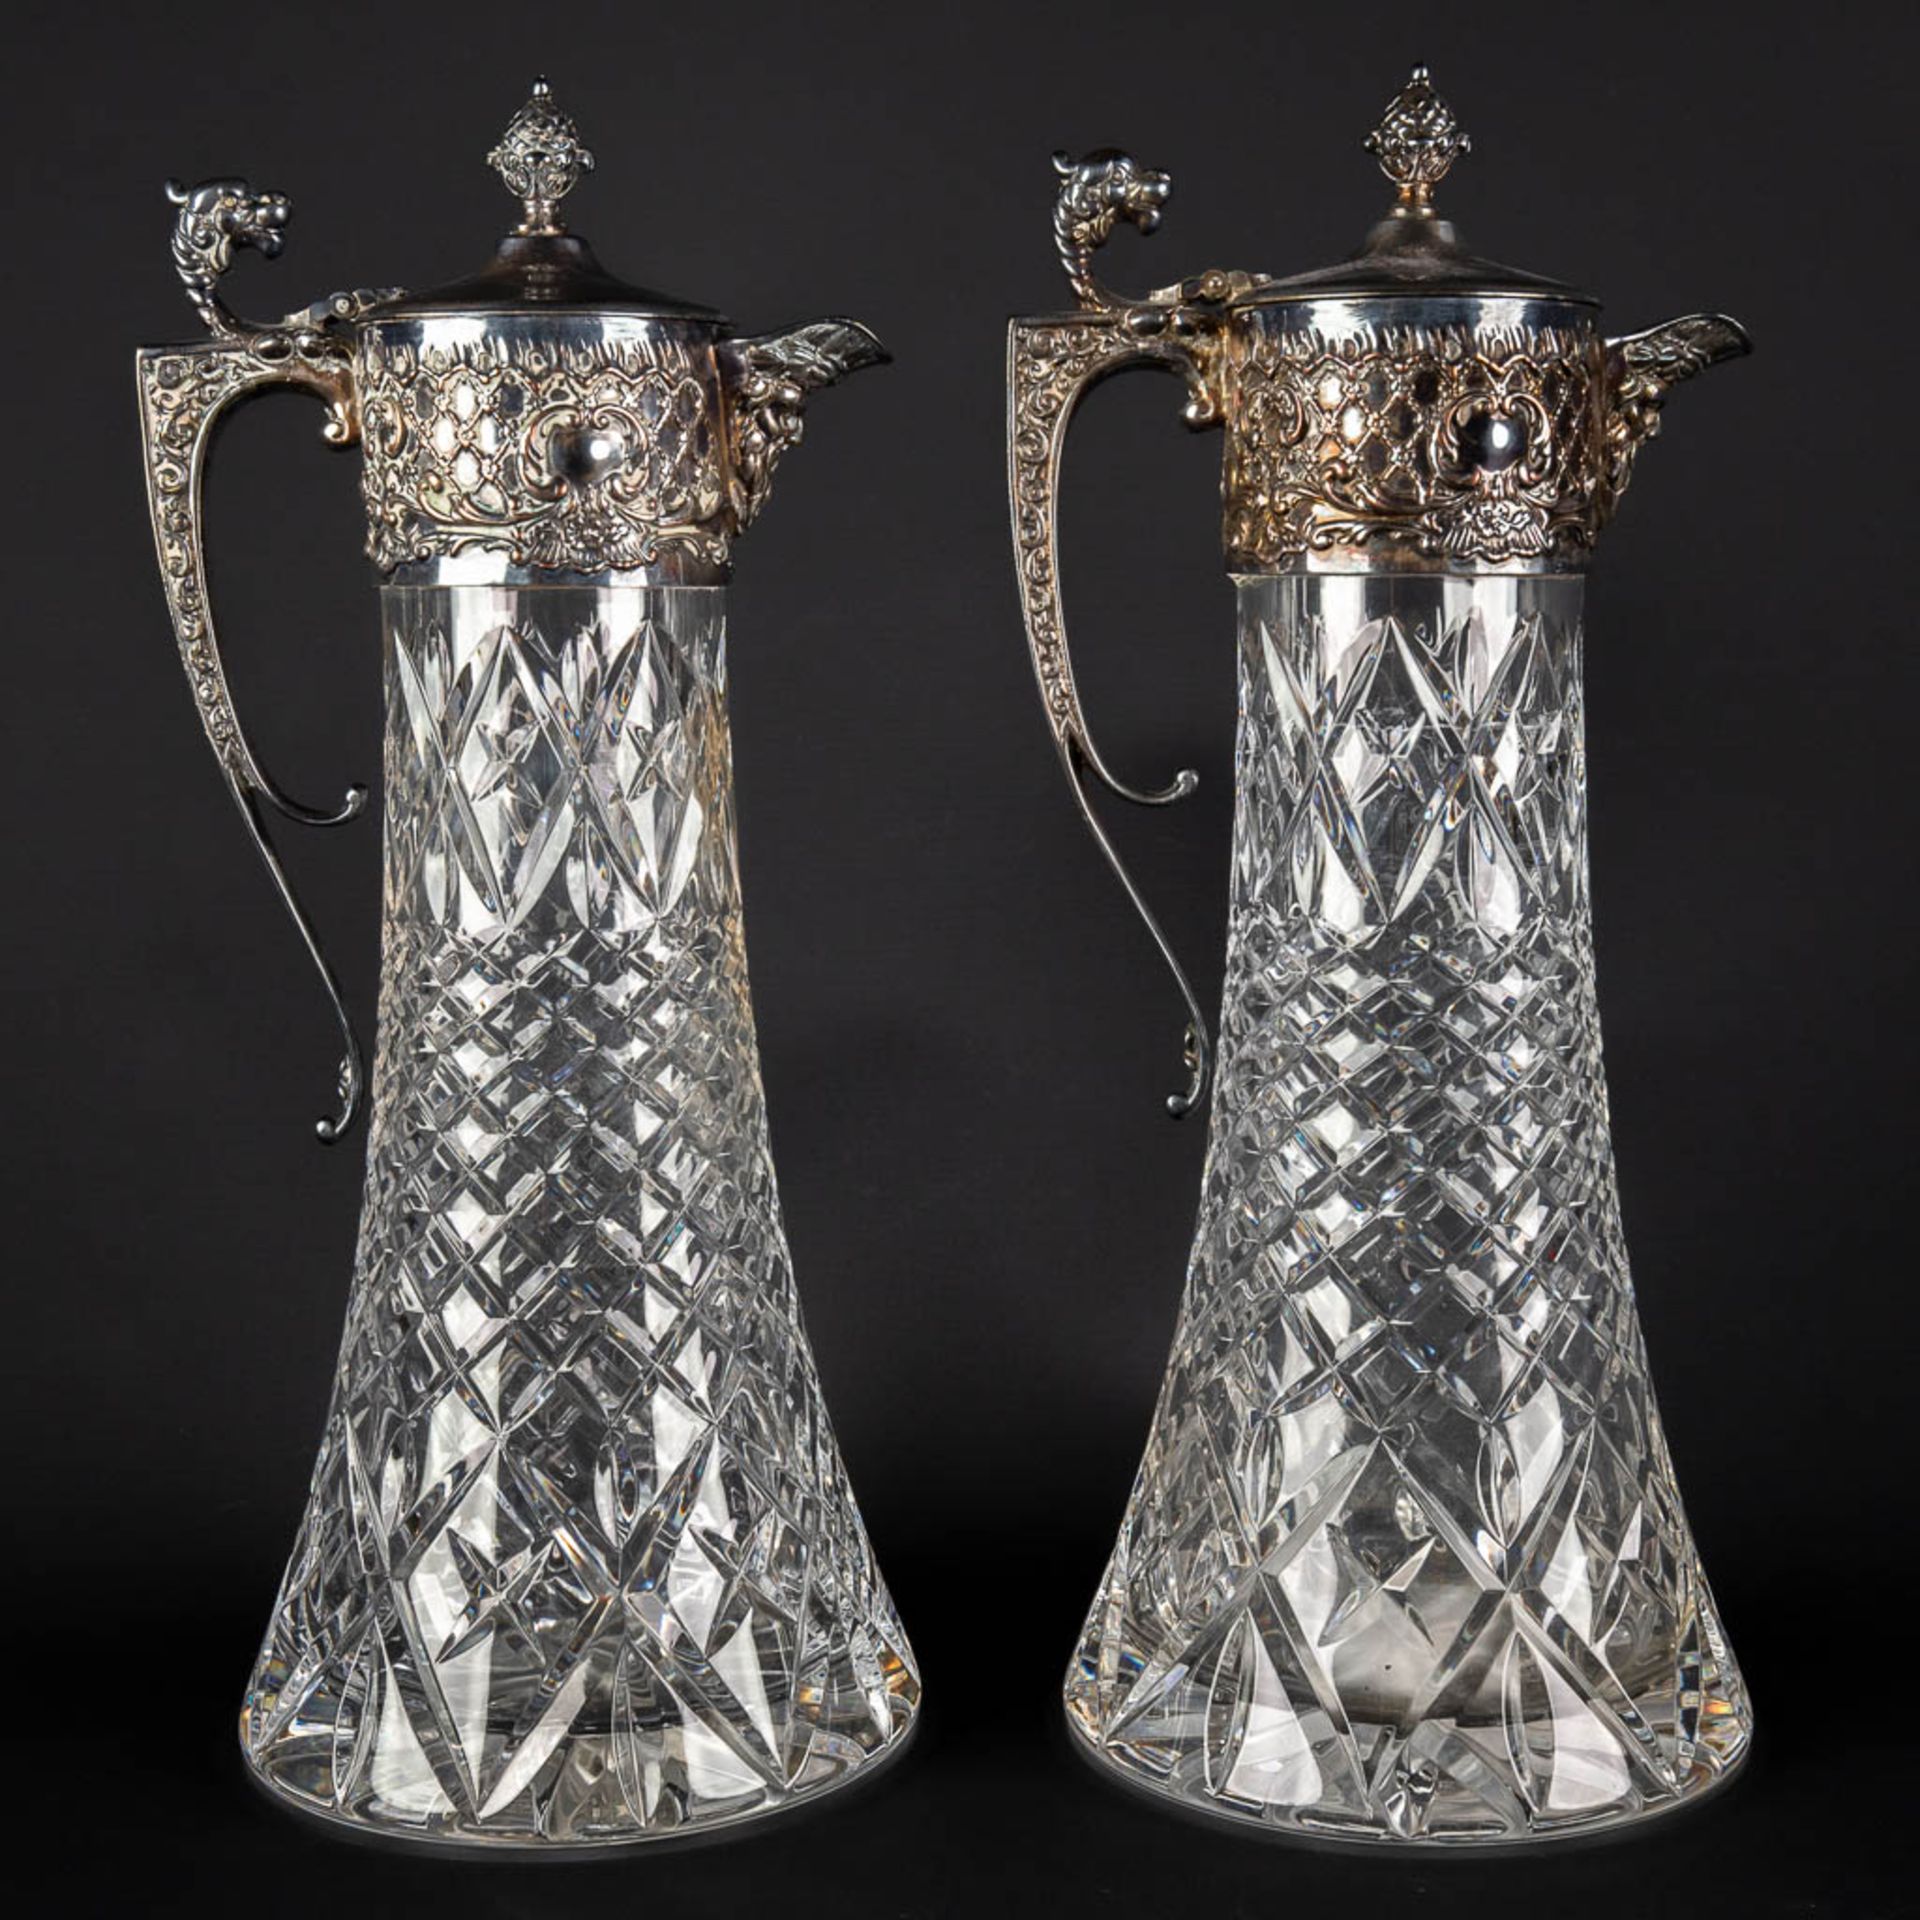 A pair of pitchers, crystal mounted with silver-plated metal. (H:30 x D:12,5 cm) - Image 3 of 13